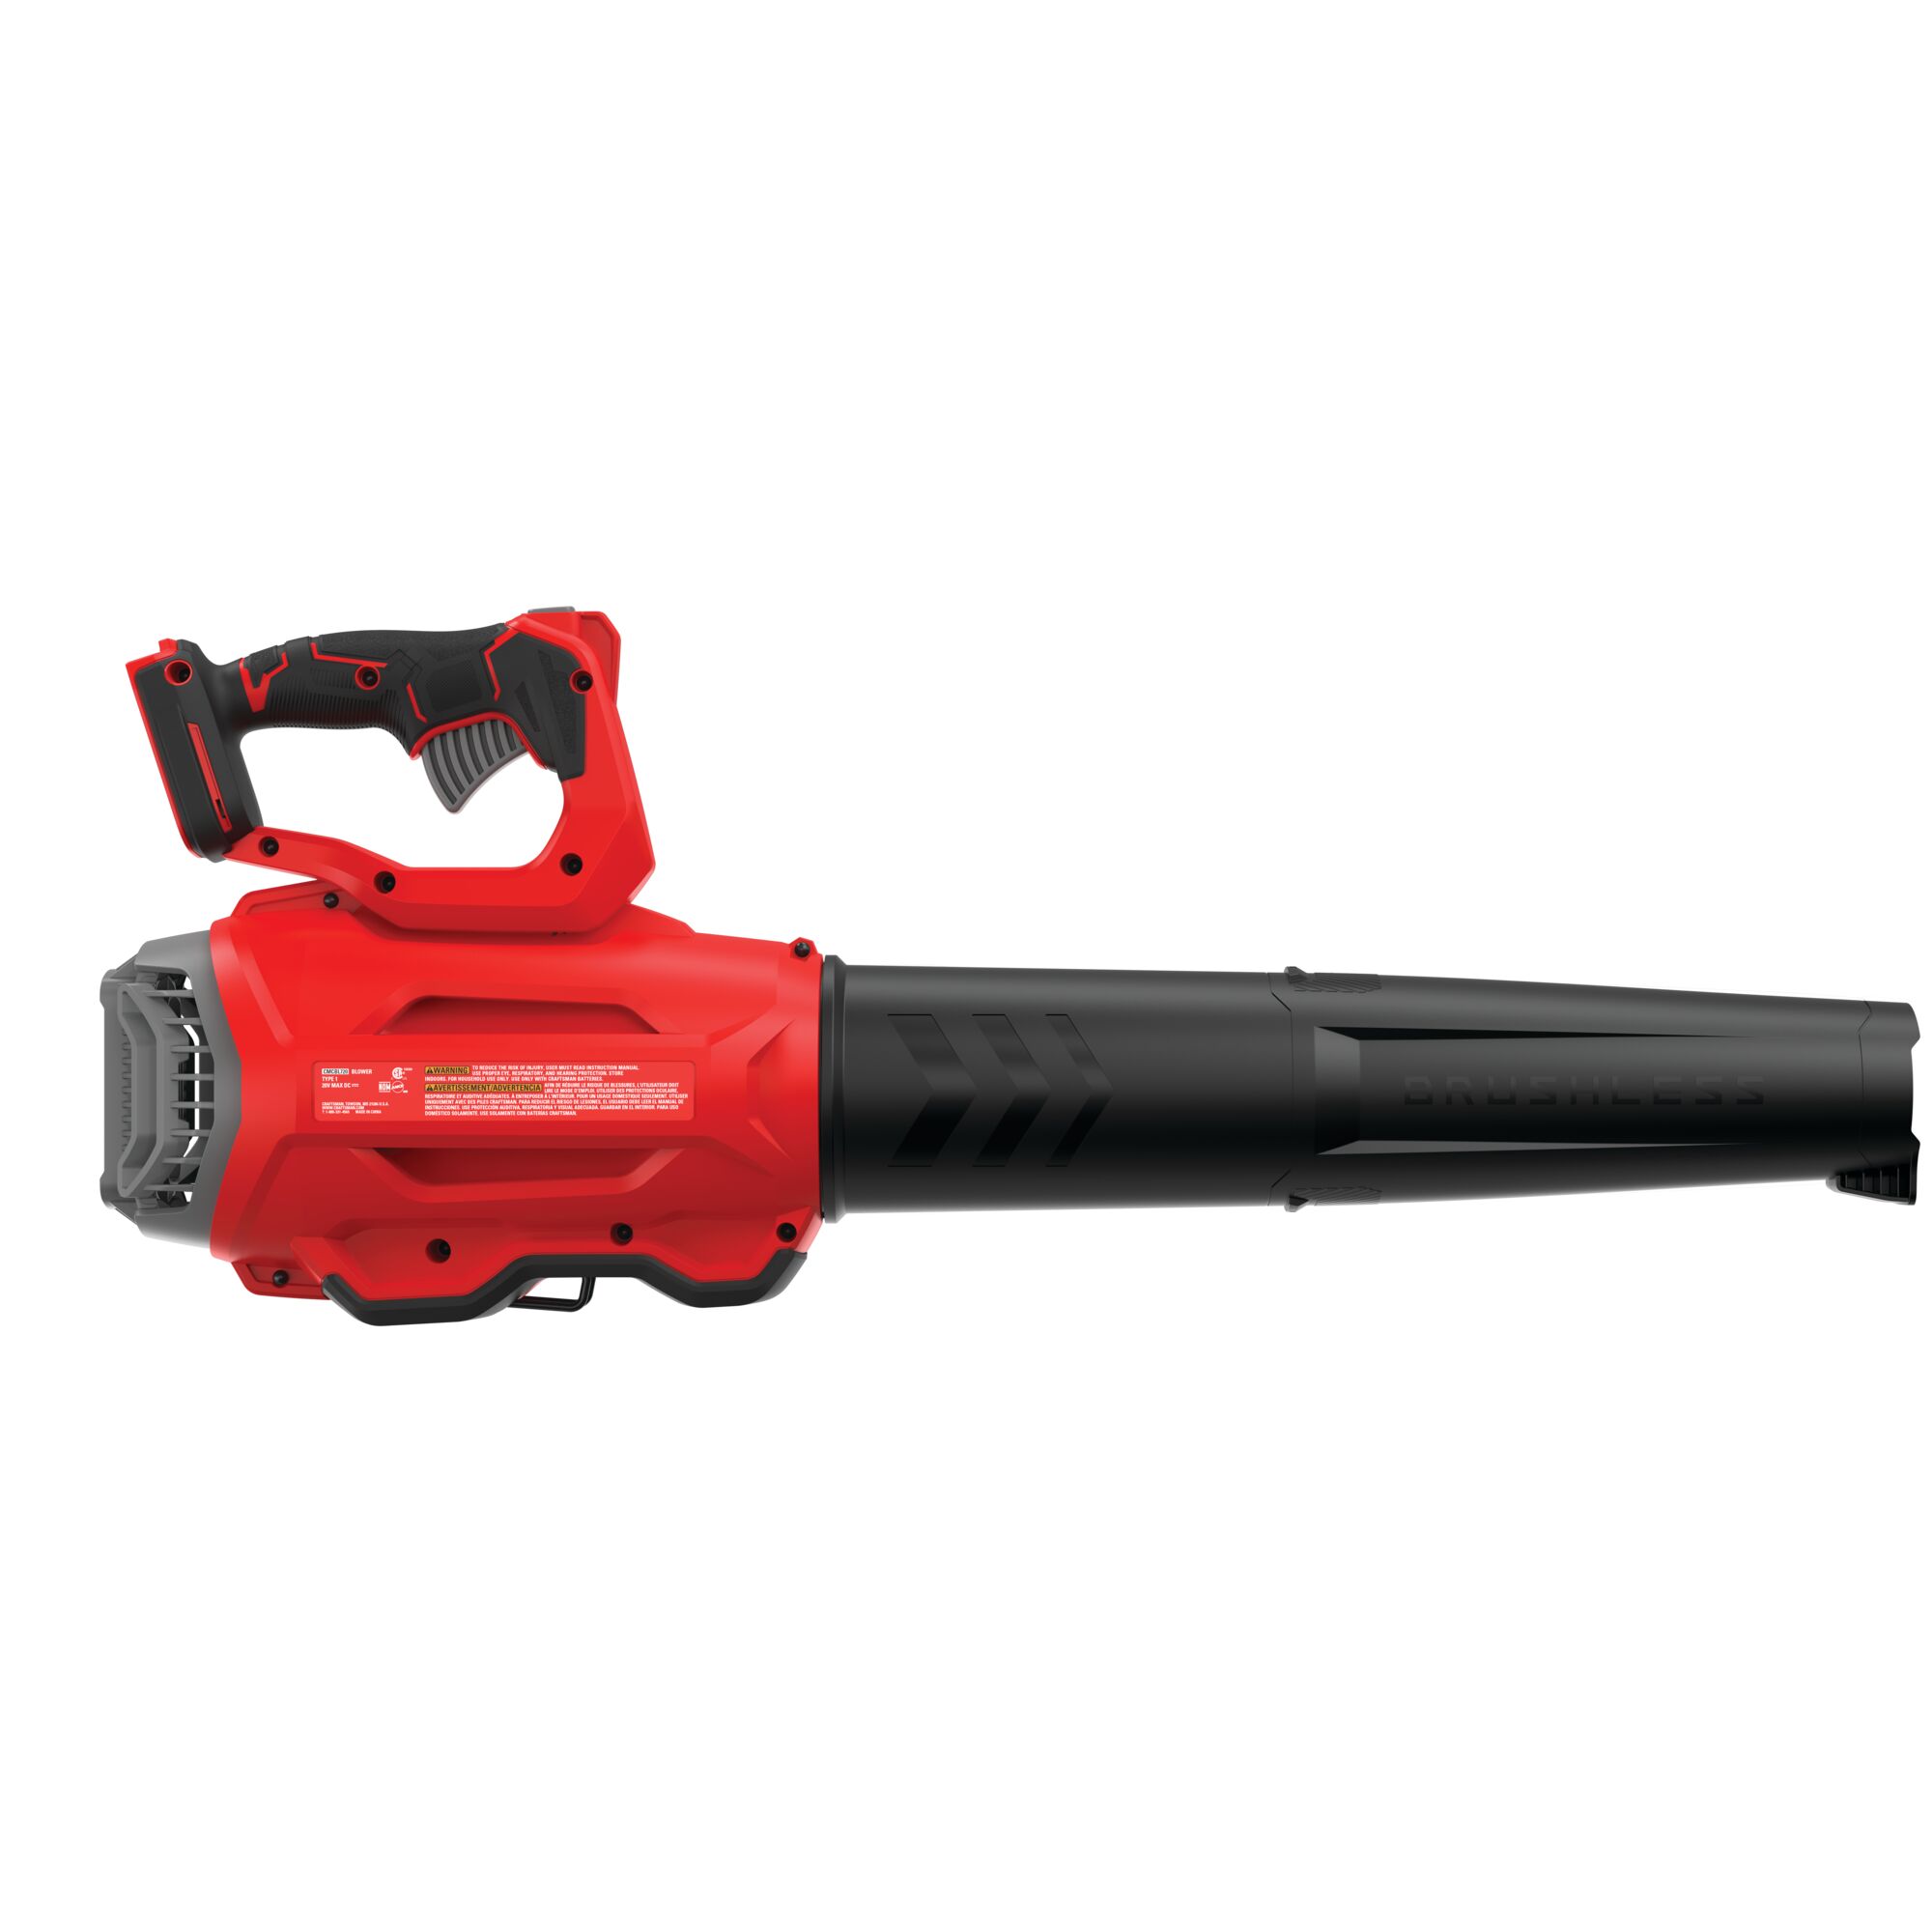 Left profile of  brushless cordless axial blower.